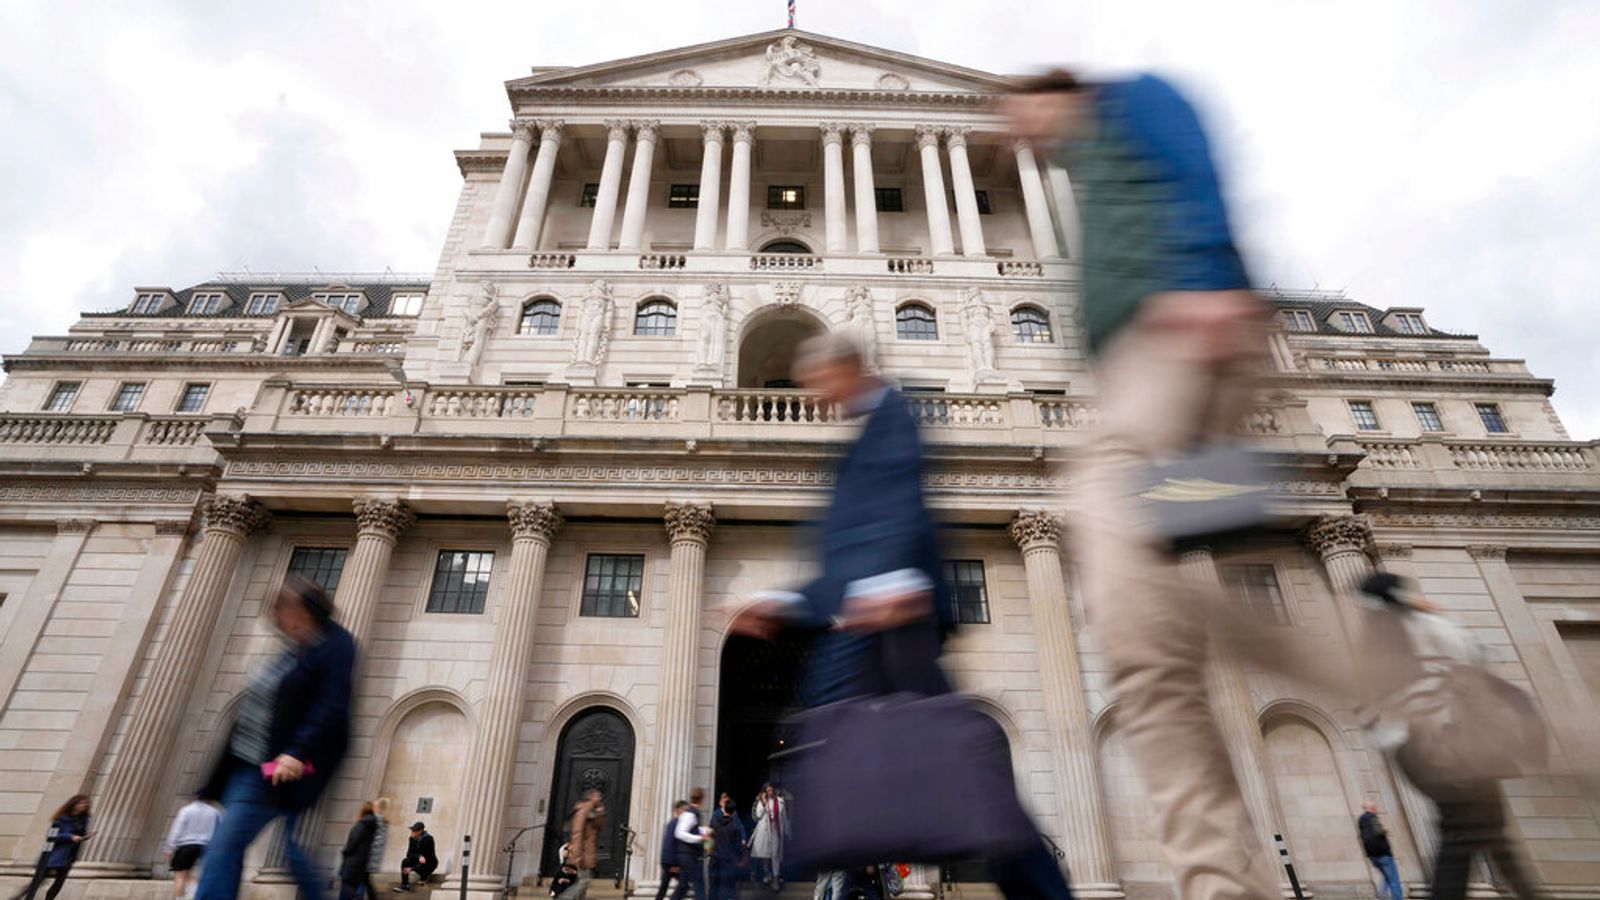 Bank of England identifies vulnerabilities due to rising interest rates but banking sector 'resilient'